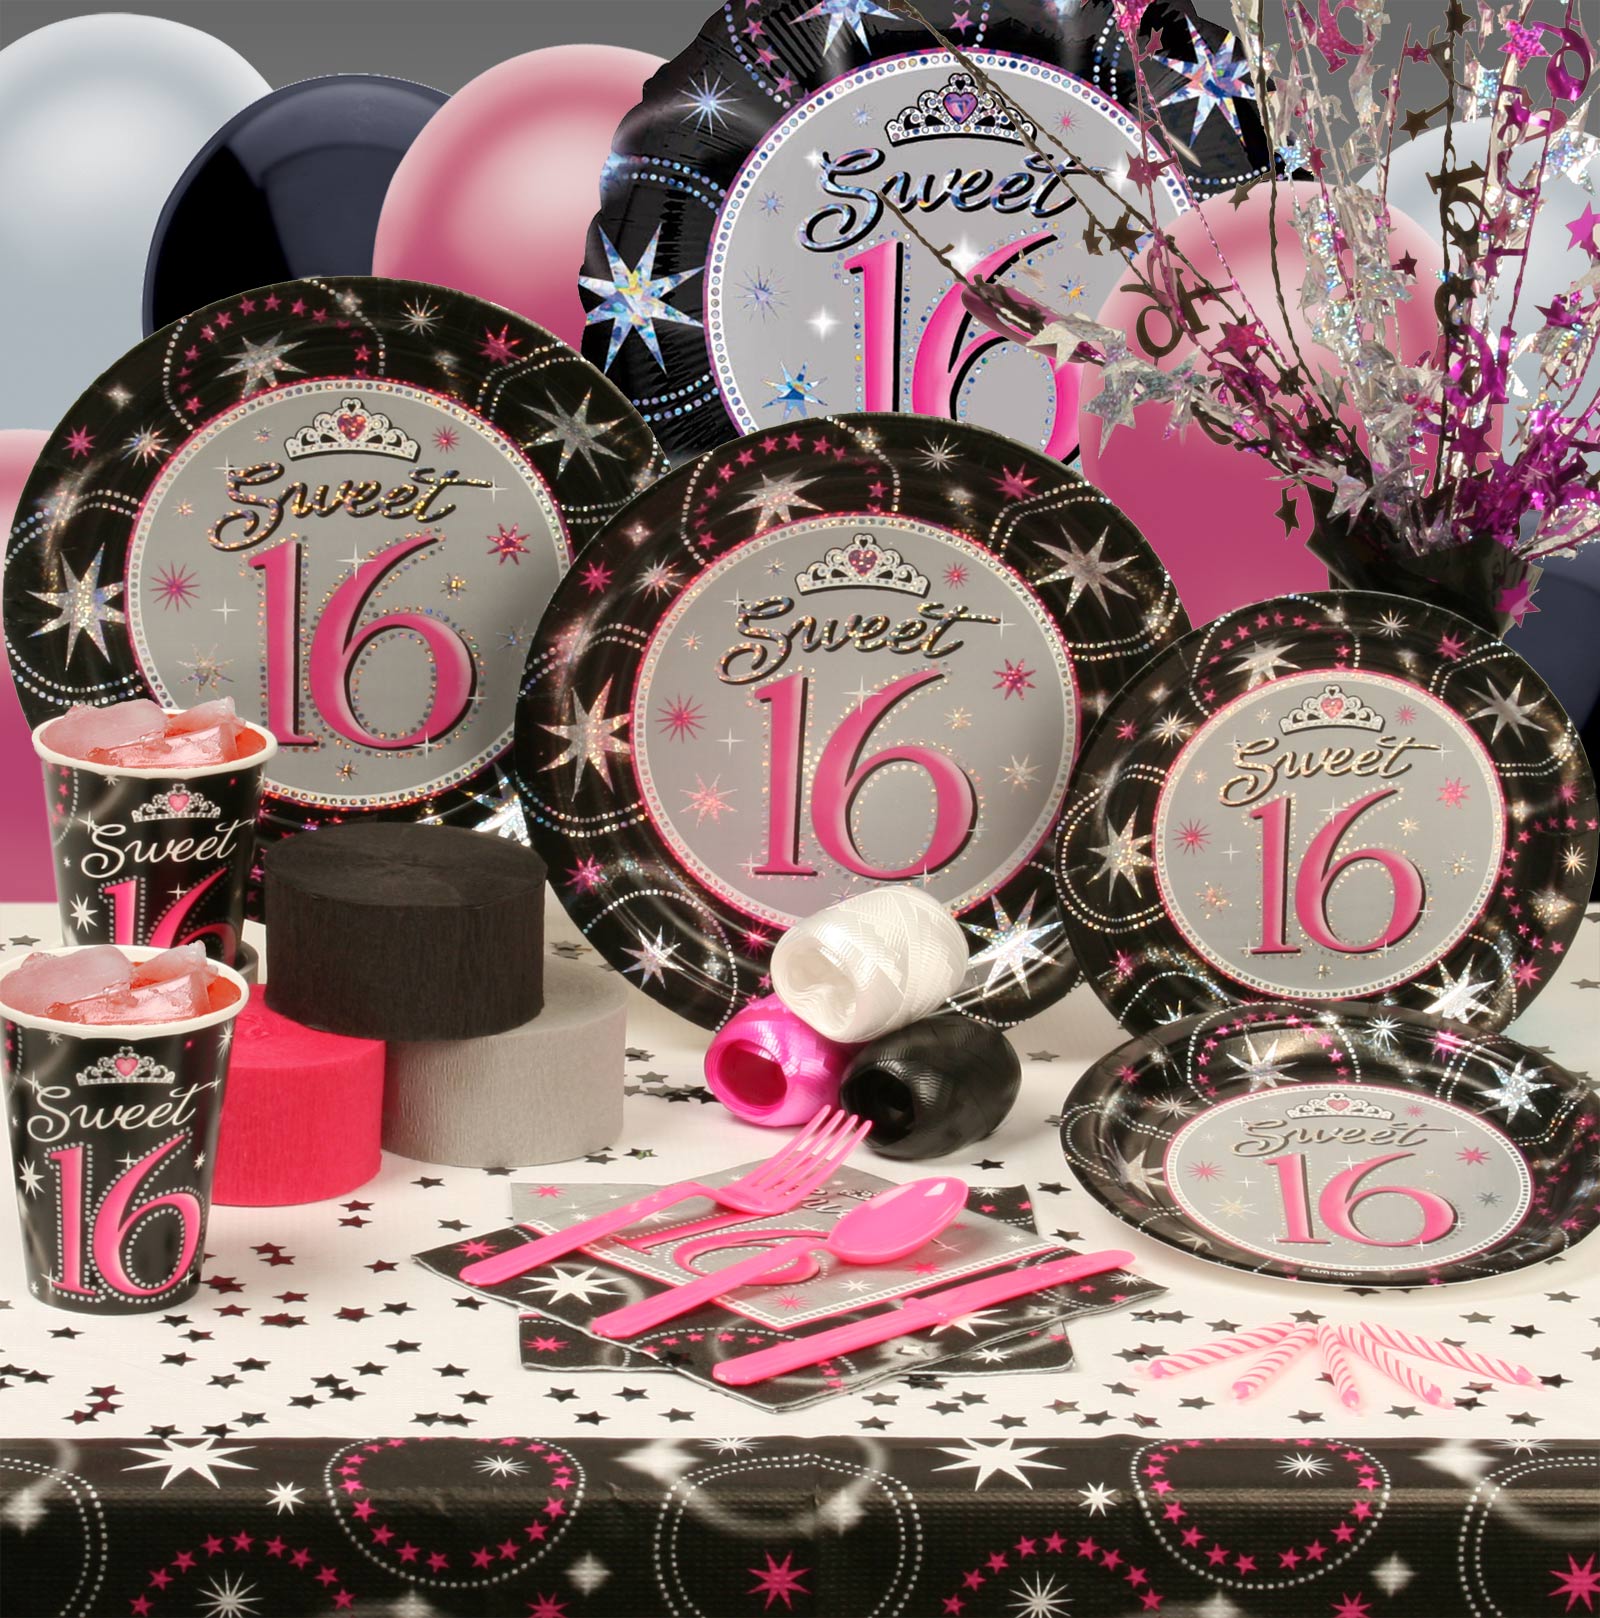 sweet-dress-sweet-16-party-themes